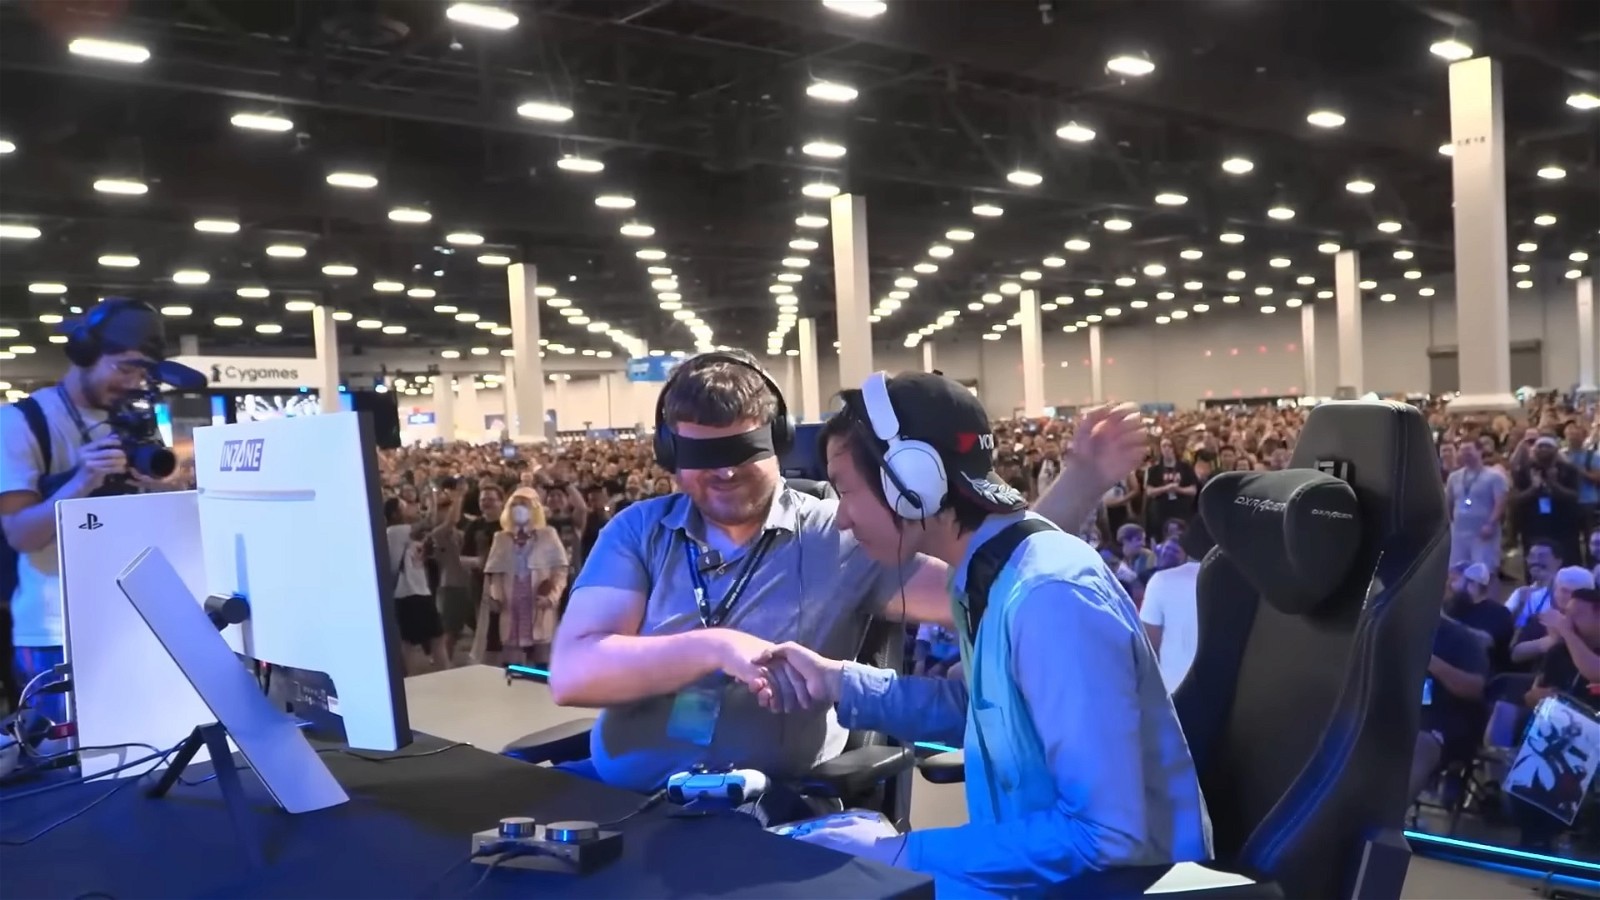 Sven's decisive victory in Street Fighter 6 made the crowds at EVO 2023 go wild.